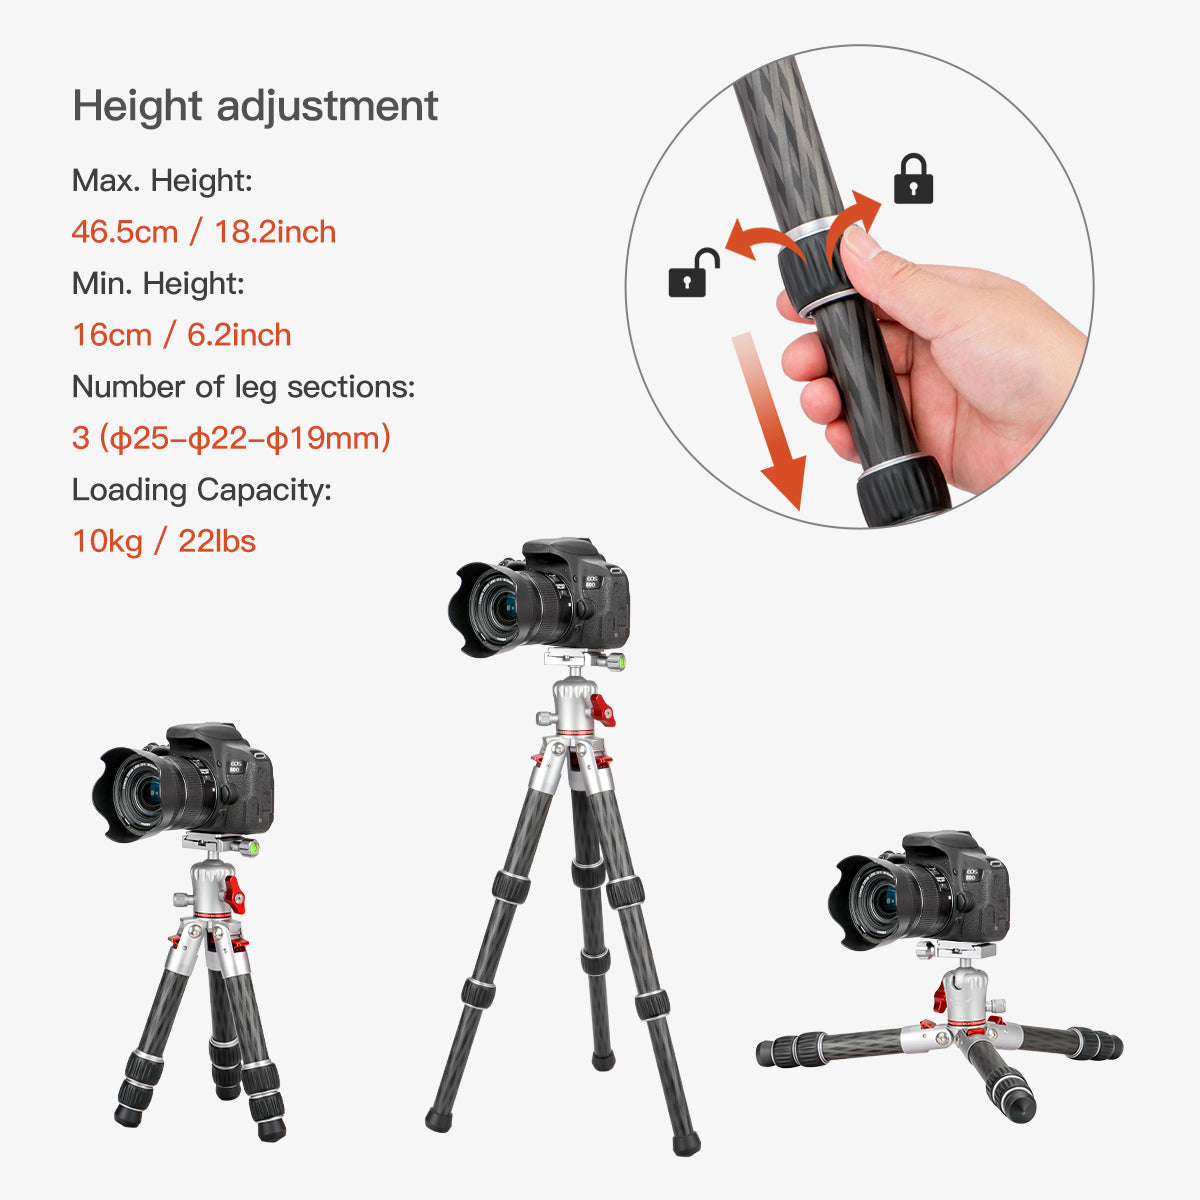 Koolehaoda Portable Carbon Fiber Mini Tripod with 360° Ballhead Lightweight Compact Tabletop Tripod Max Load 22lbs/10kg for DSLR Camera,Weighs only 1.5 pounds - (TKS-253C)